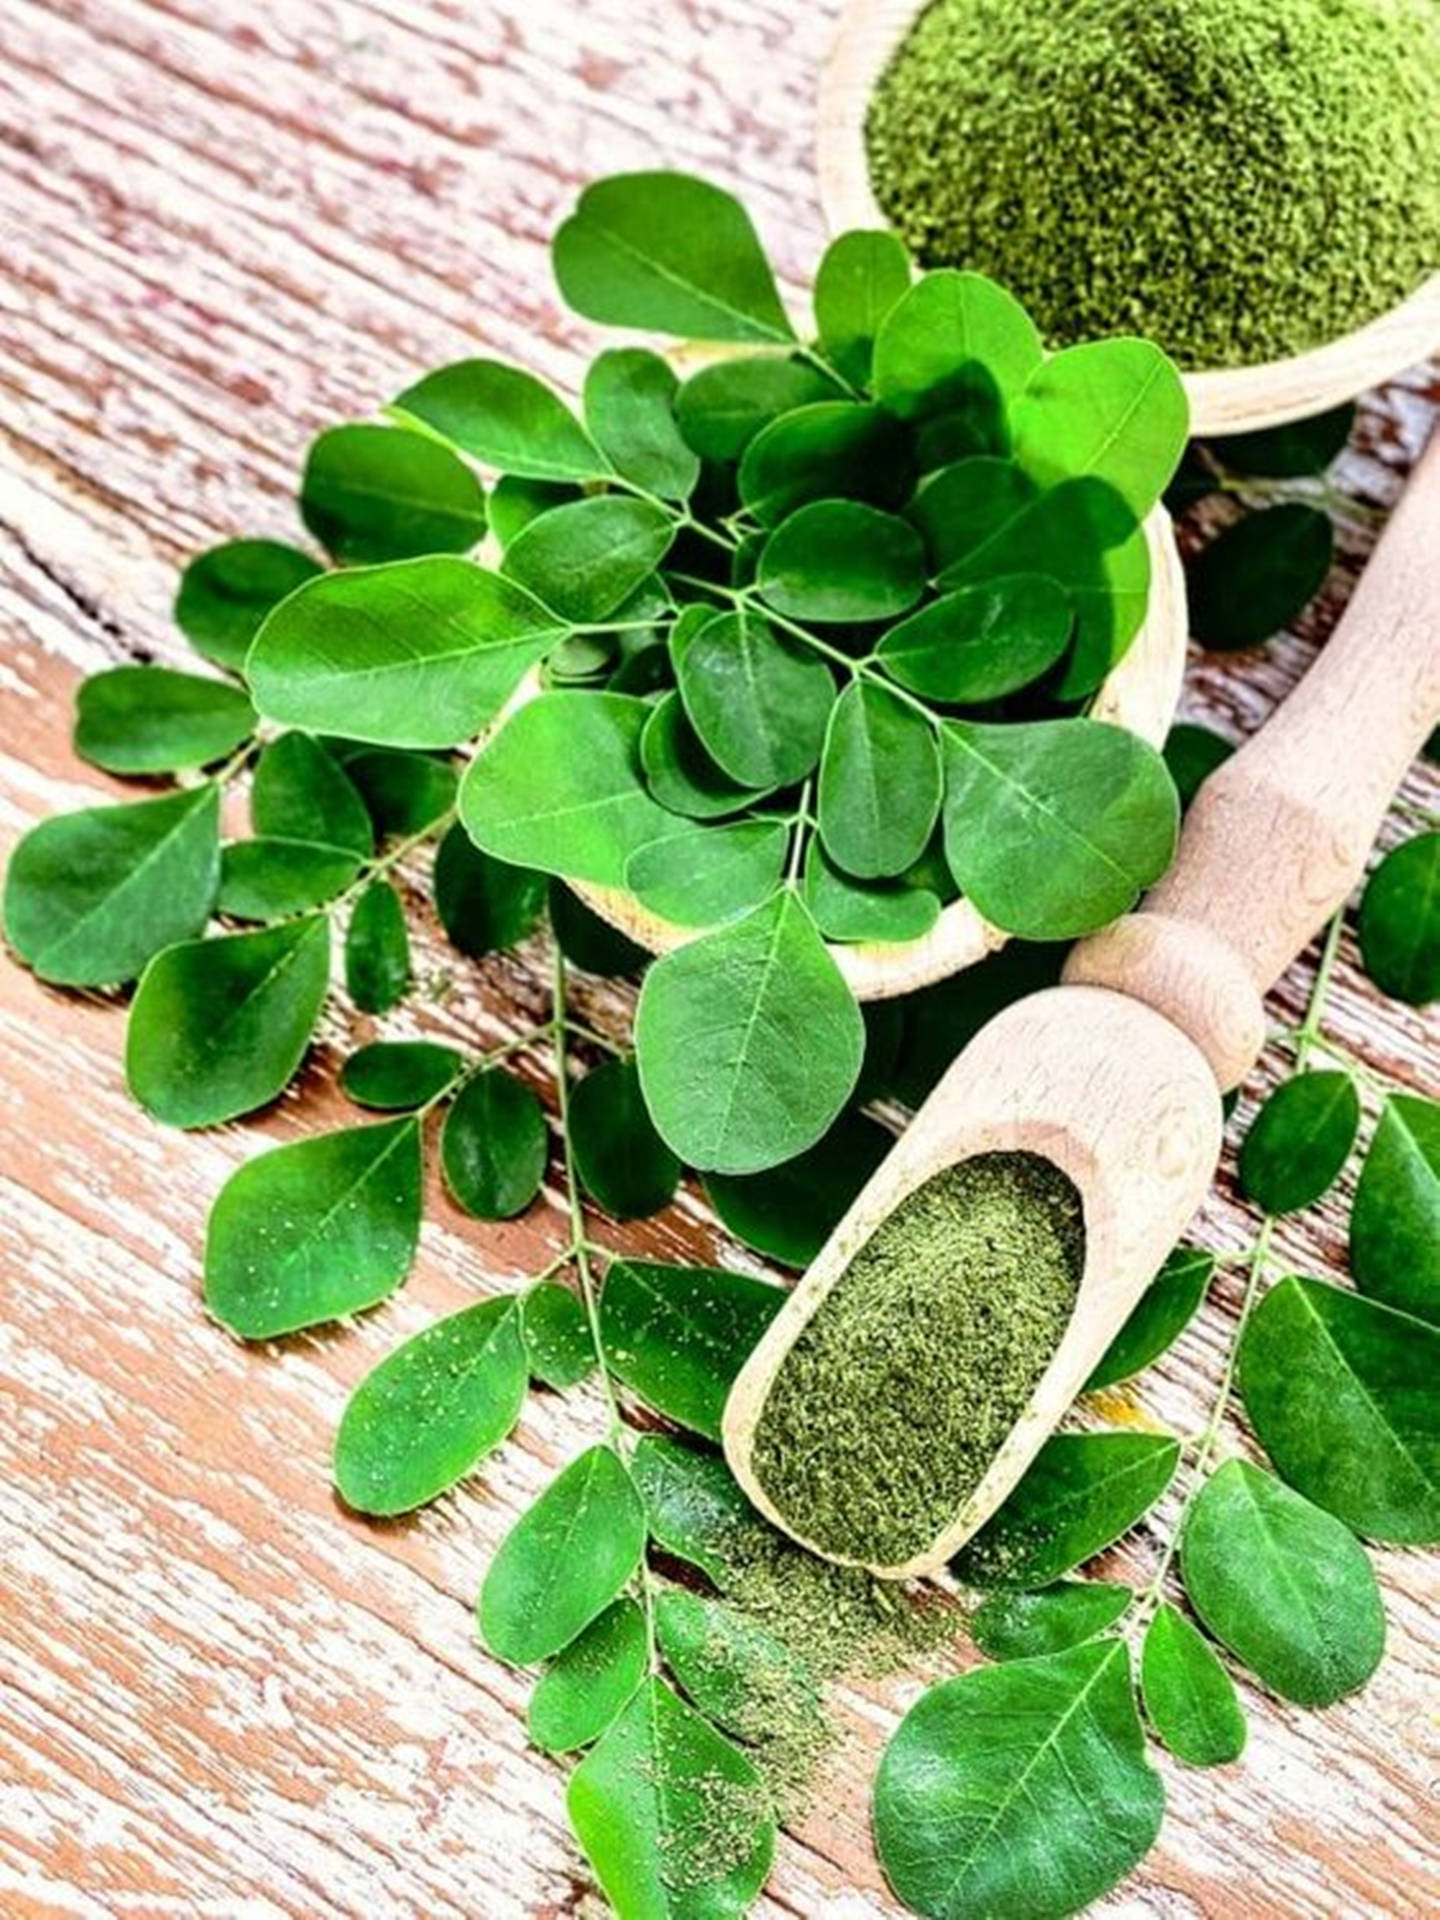 Scoopof Miracle Moringa Plant Would Be Translated As 